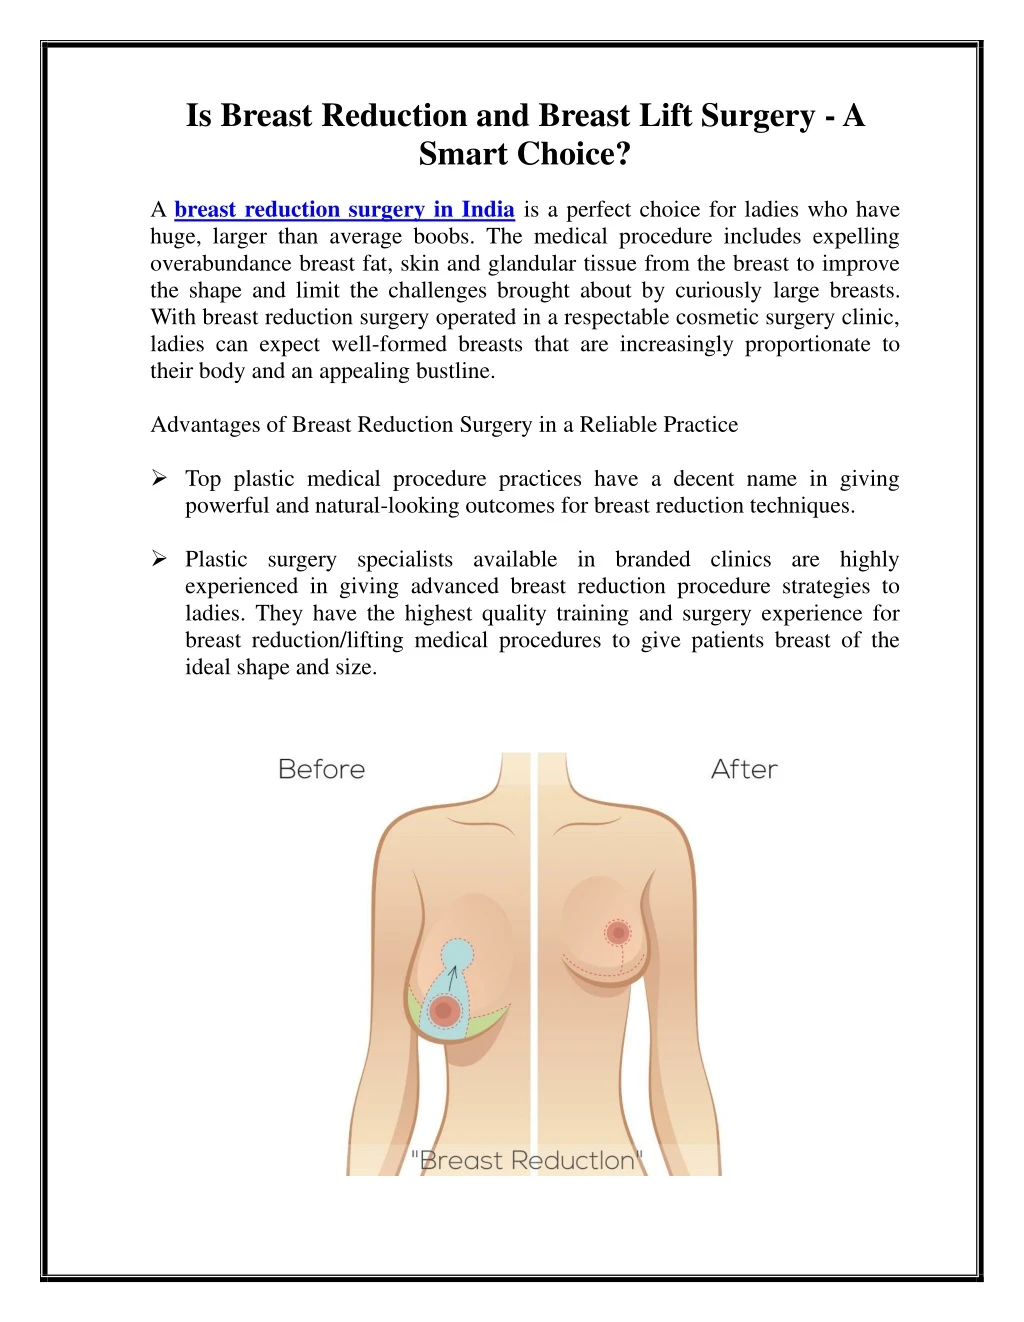 is breast reduction and breast lift surgery